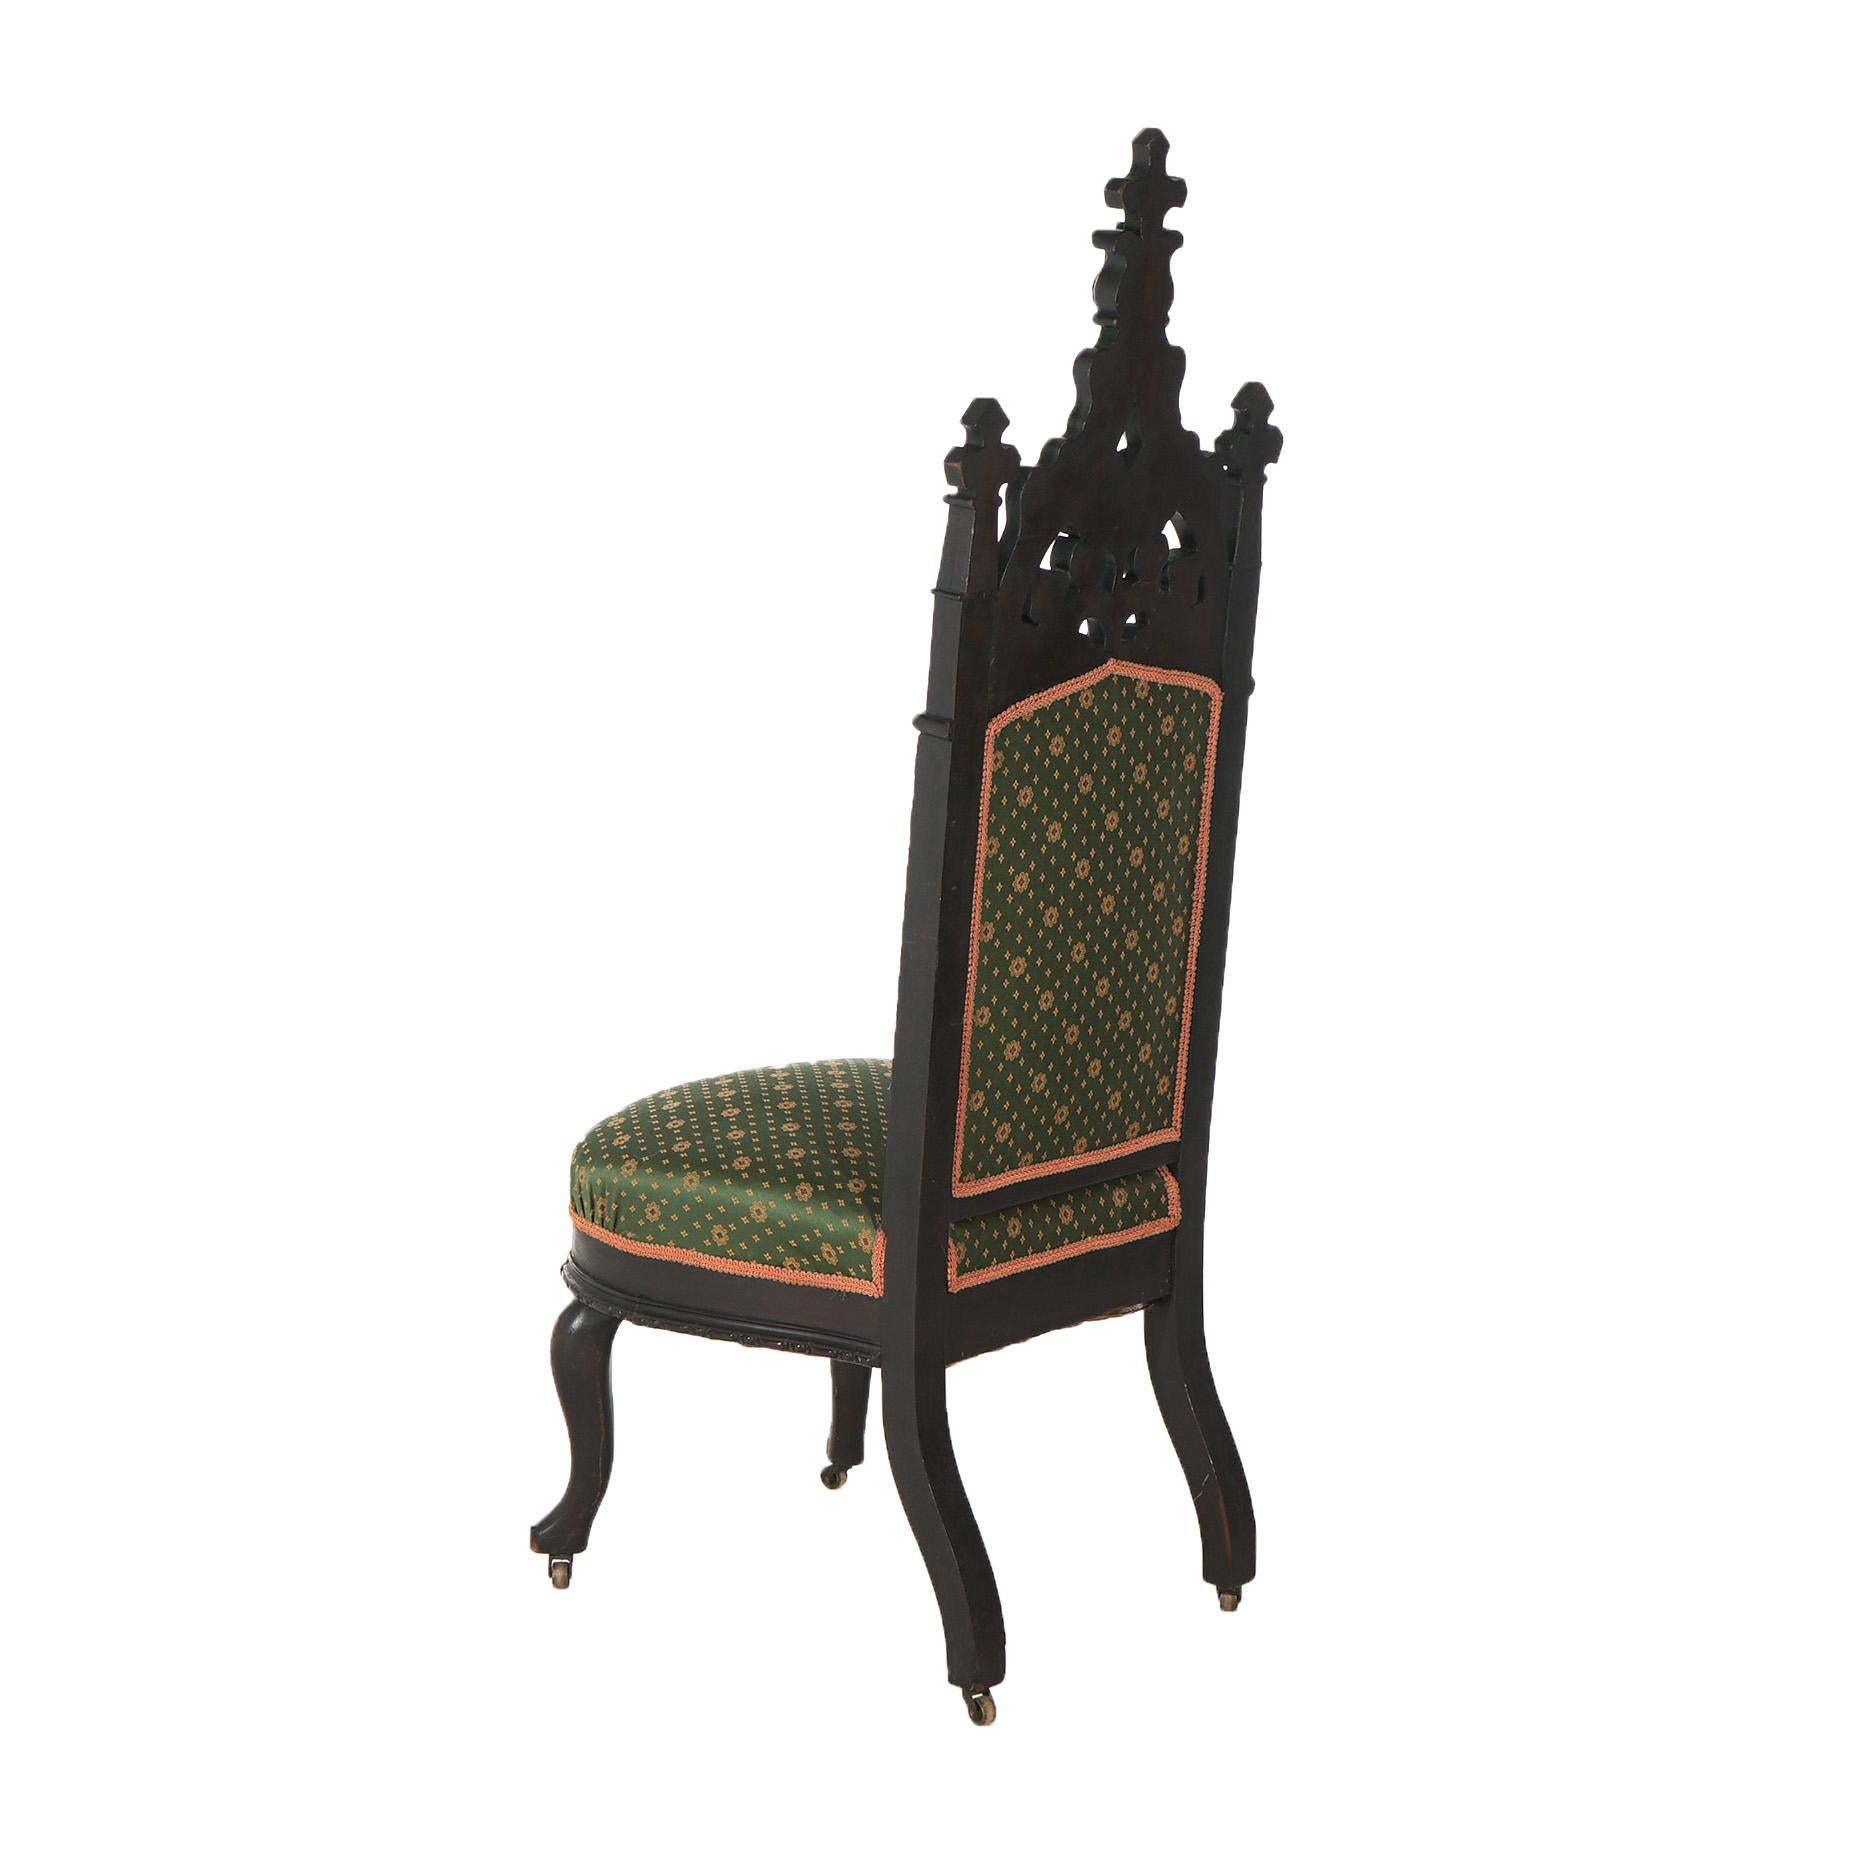 Antique Gothic Revival Ebonized & Carved Walnut Upholstered Throne Chair C1860 For Sale 2